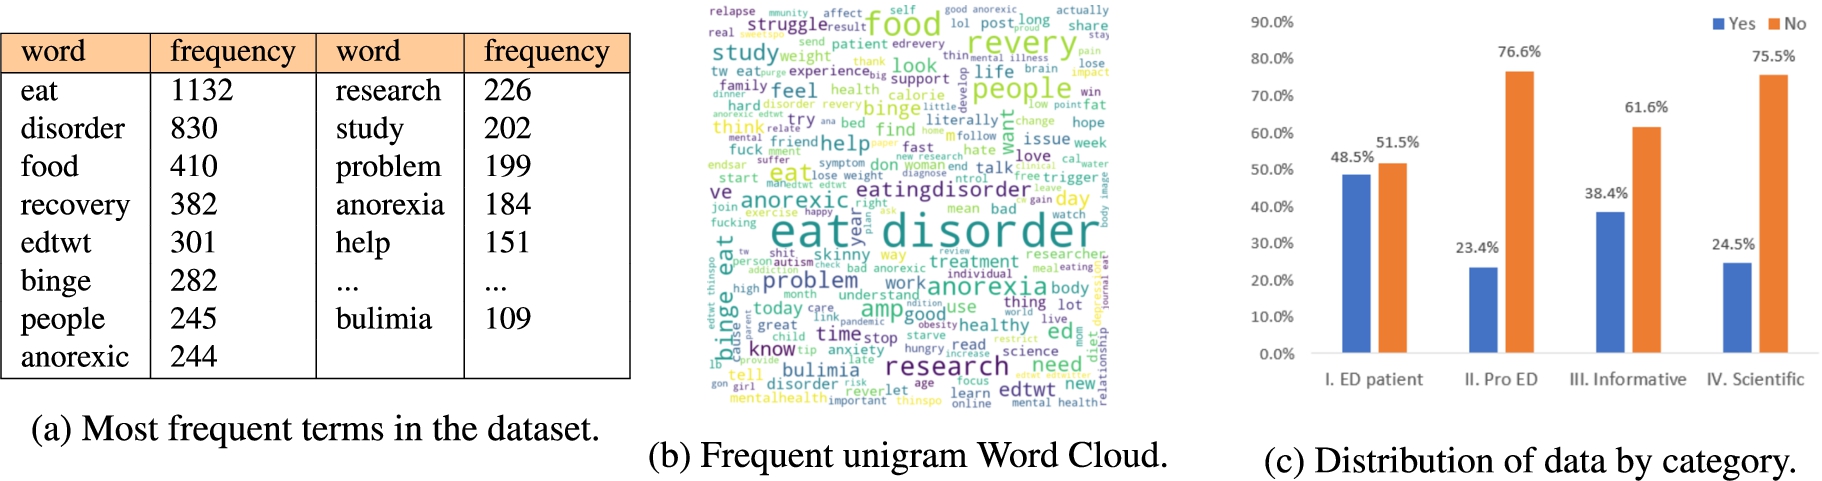 Results of the analysis of the dataset, showing the most frequent terms and the distribution of the categories.